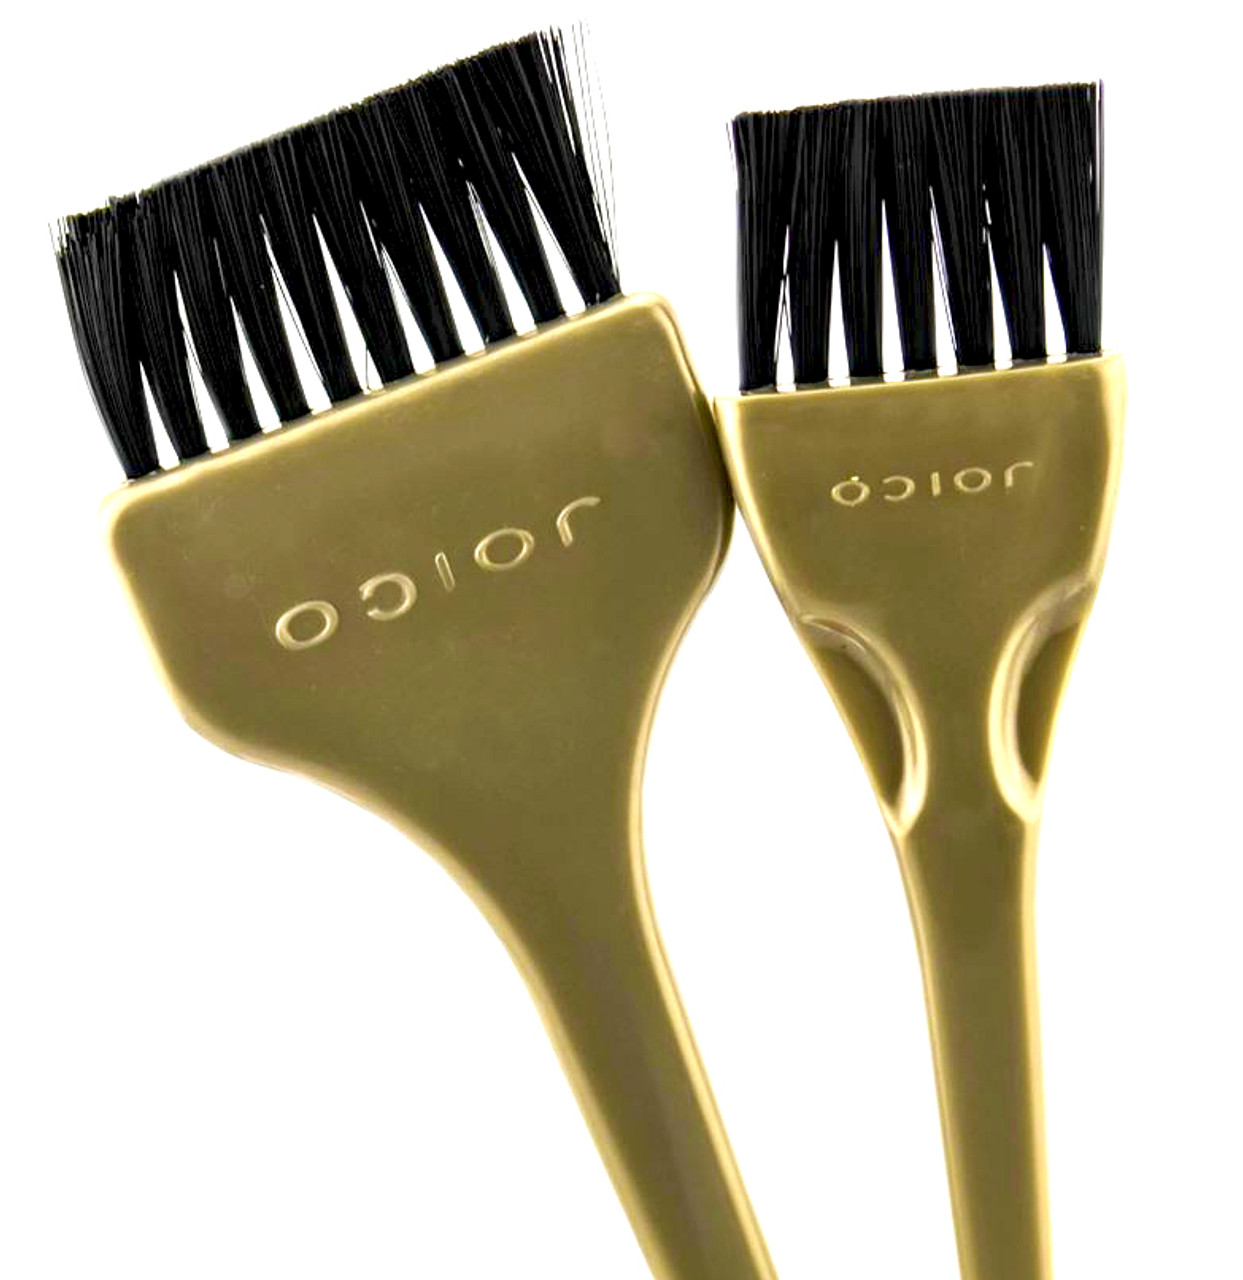 3 Colors Hair Dyeing Bottle Brush: Scalp and Hair Oil Applicator Tool with  Comb for Precise Root Growth and Color Application Hair Color Bottle and